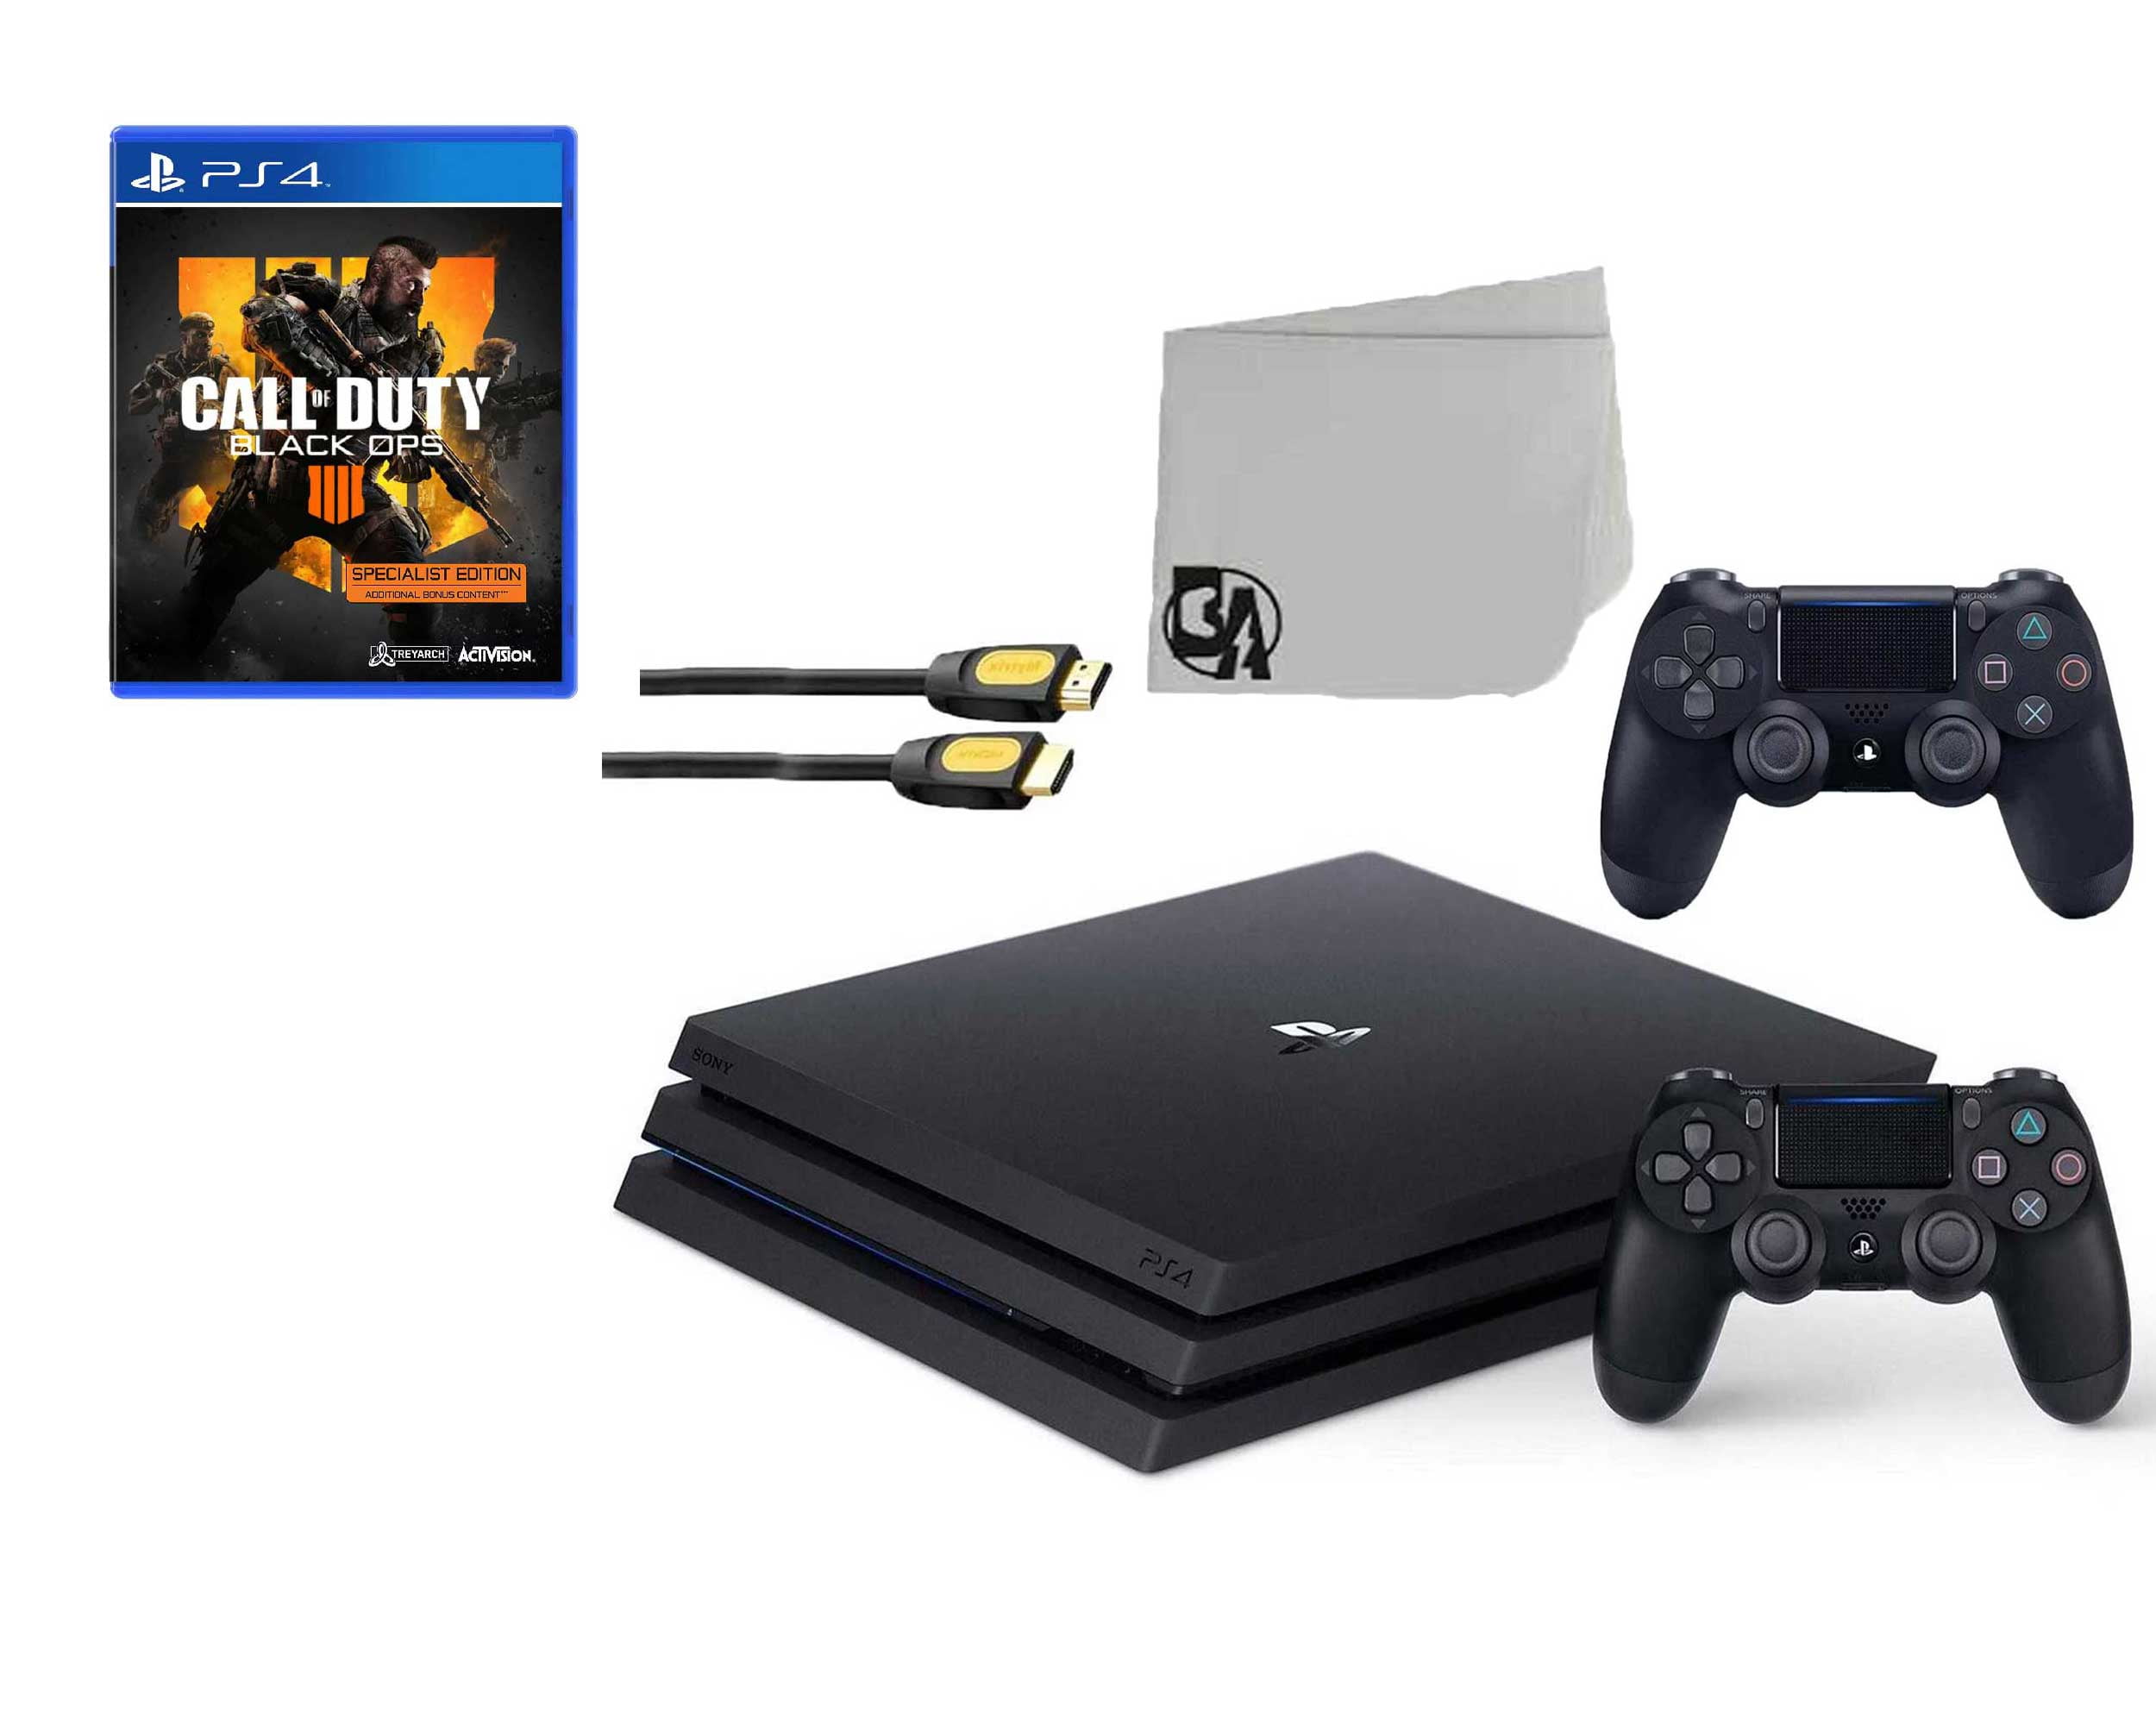 Sony PlayStation 4 Pro 1TB Gaming Console Black 2 Controller Included with God of War BOLT AXTION New - Walmart.com